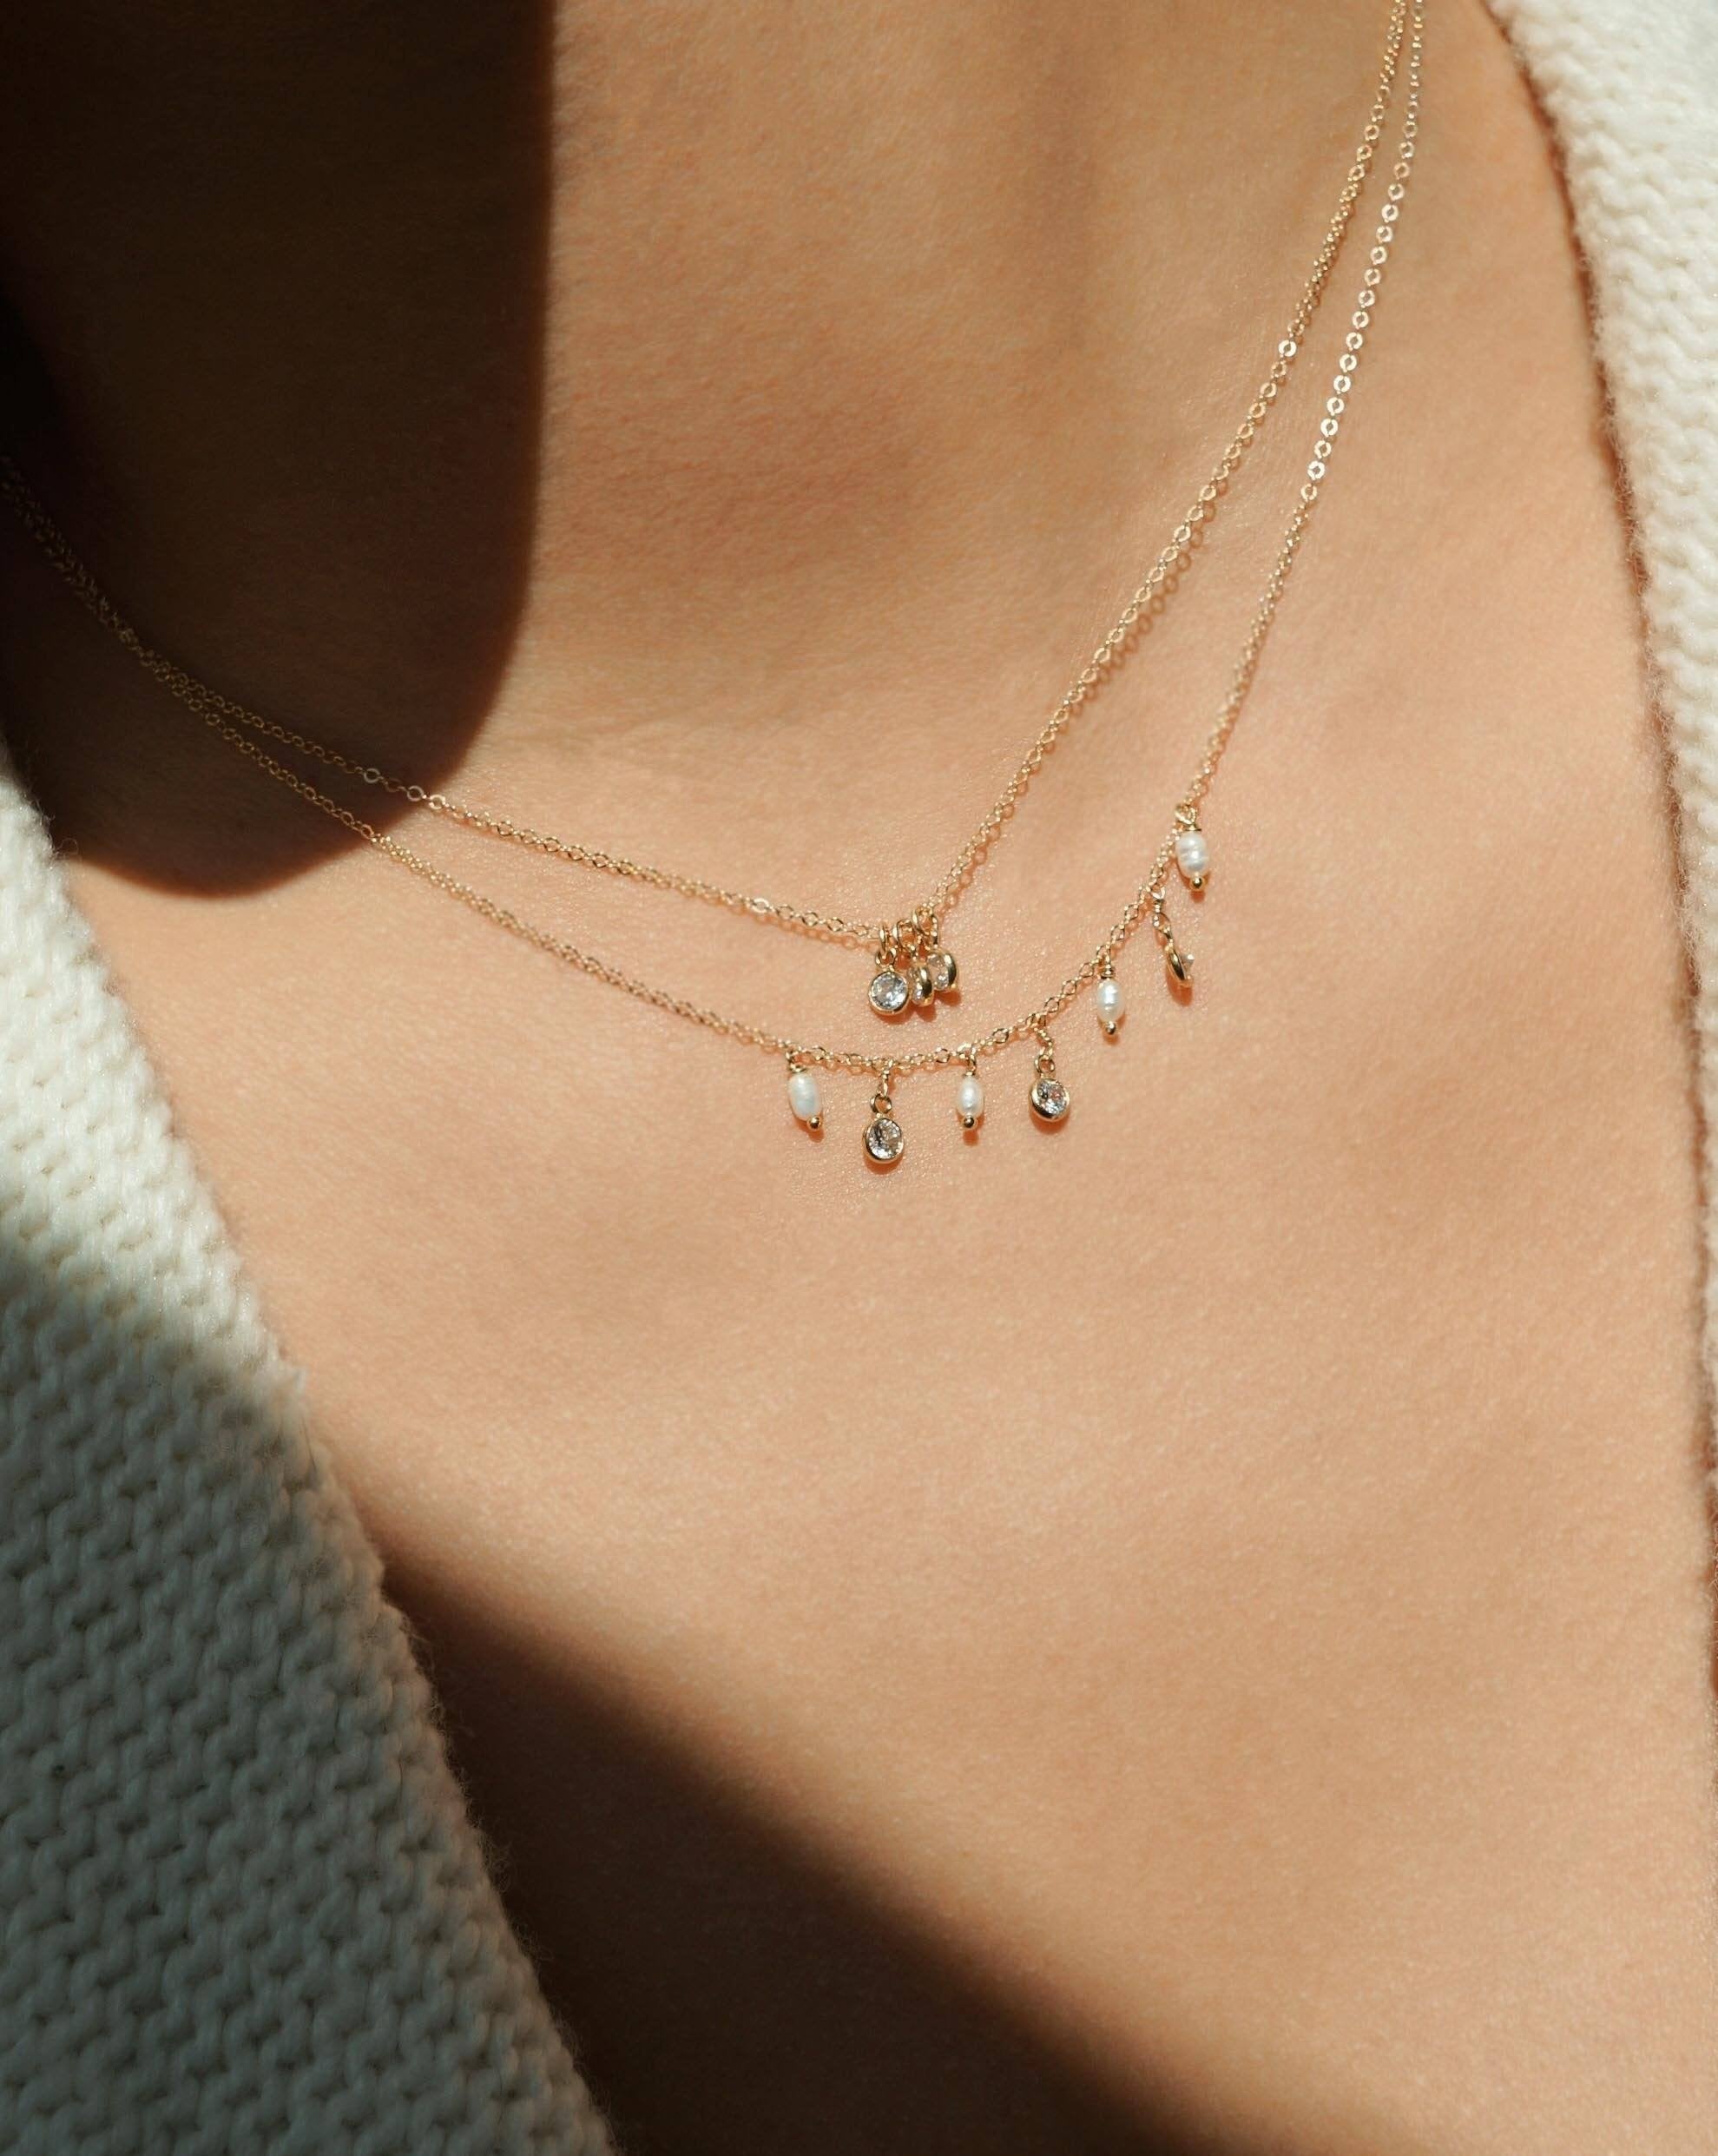 Trizare Necklace by KOZAKH. A 16 to 18 inch adjustable length necklace, crafted in 14K Gold Filled, featuring 3mm Cubic Zirconia bezels.